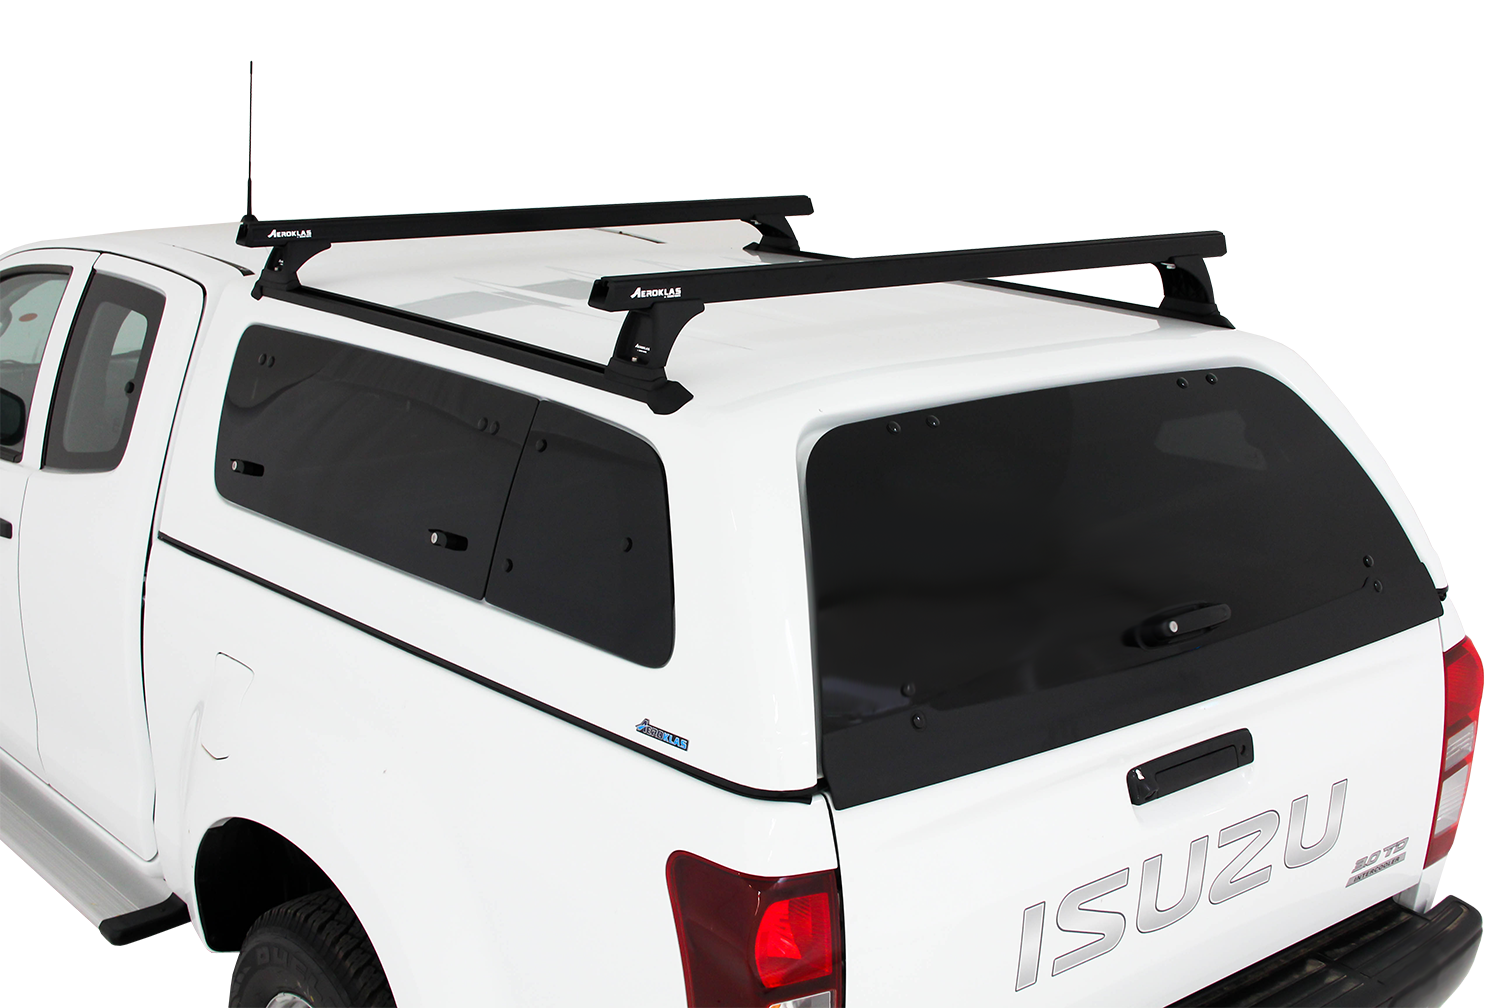 VMN offers premium canopies that feature lift up window, driver's side windows for easy installation.